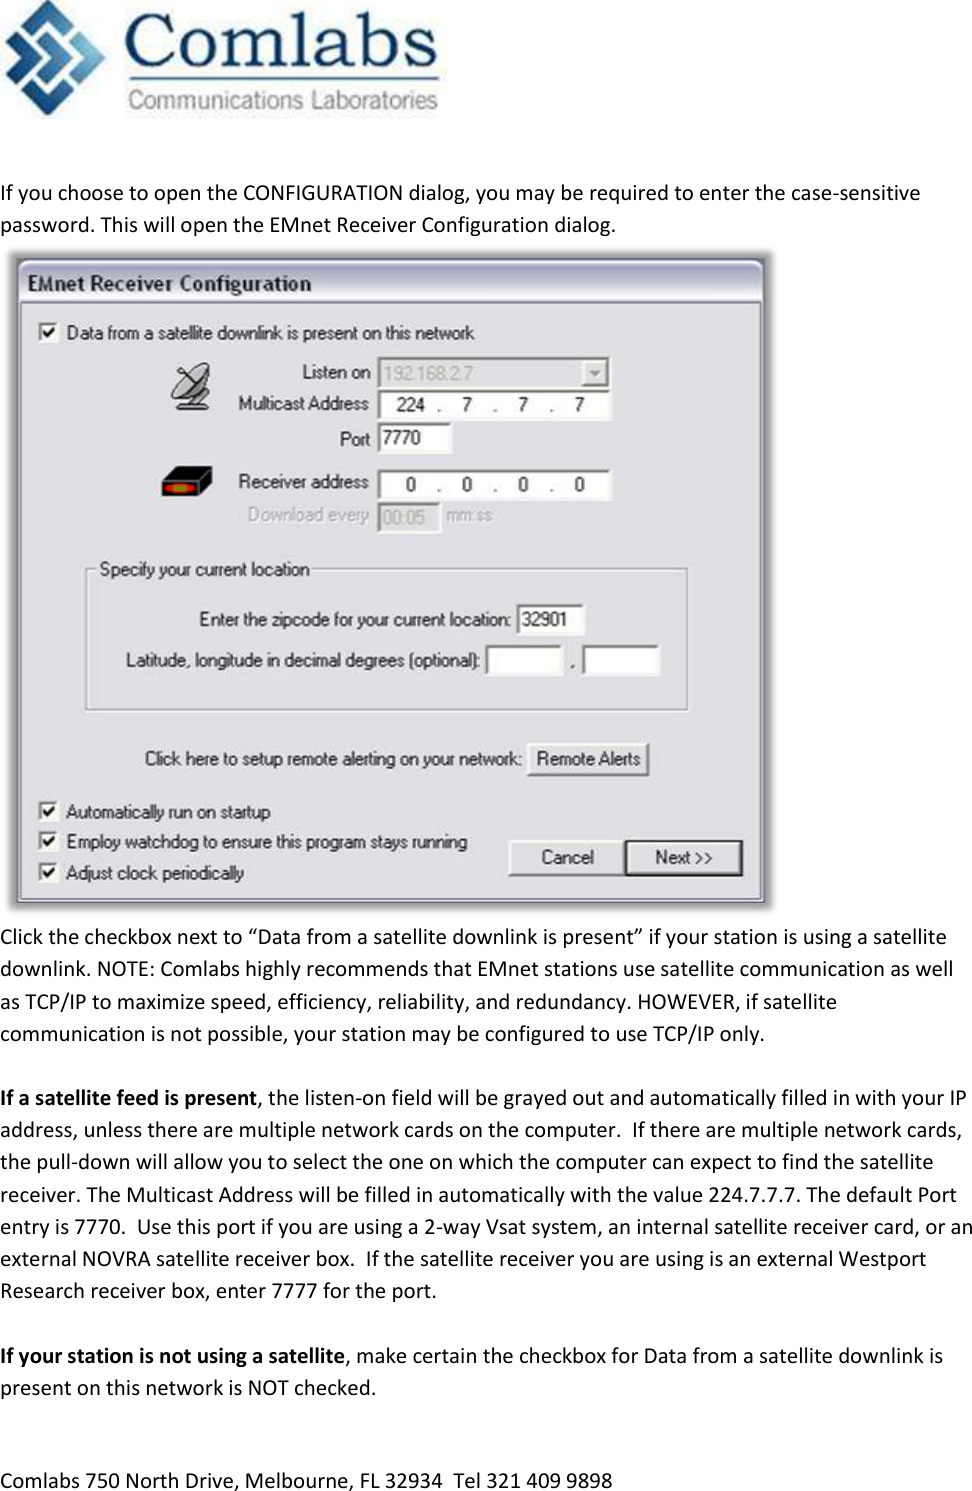   Comlabs 750 North Drive, Melbourne, FL 32934  Tel 321 409 9898  If you choose to open the CONFIGURATION dialog, you may be required to enter the case-sensitive password. This will open the EMnet Receiver Configuration dialog.  Click the checkbox next to “Data from a satellite downlink is present” if your station is using a satellite downlink. NOTE: Comlabs highly recommends that EMnet stations use satellite communication as well as TCP/IP to maximize speed, efficiency, reliability, and redundancy. HOWEVER, if satellite communication is not possible, your station may be configured to use TCP/IP only.   If a satellite feed is present, the listen-on field will be grayed out and automatically filled in with your IP address, unless there are multiple network cards on the computer.  If there are multiple network cards, the pull-down will allow you to select the one on which the computer can expect to find the satellite receiver. The Multicast Address will be filled in automatically with the value 224.7.7.7. The default Port entry is 7770.  Use this port if you are using a 2-way Vsat system, an internal satellite receiver card, or an external NOVRA satellite receiver box.  If the satellite receiver you are using is an external Westport Research receiver box, enter 7777 for the port.  If your station is not using a satellite, make certain the checkbox for Data from a satellite downlink is present on this network is NOT checked. 